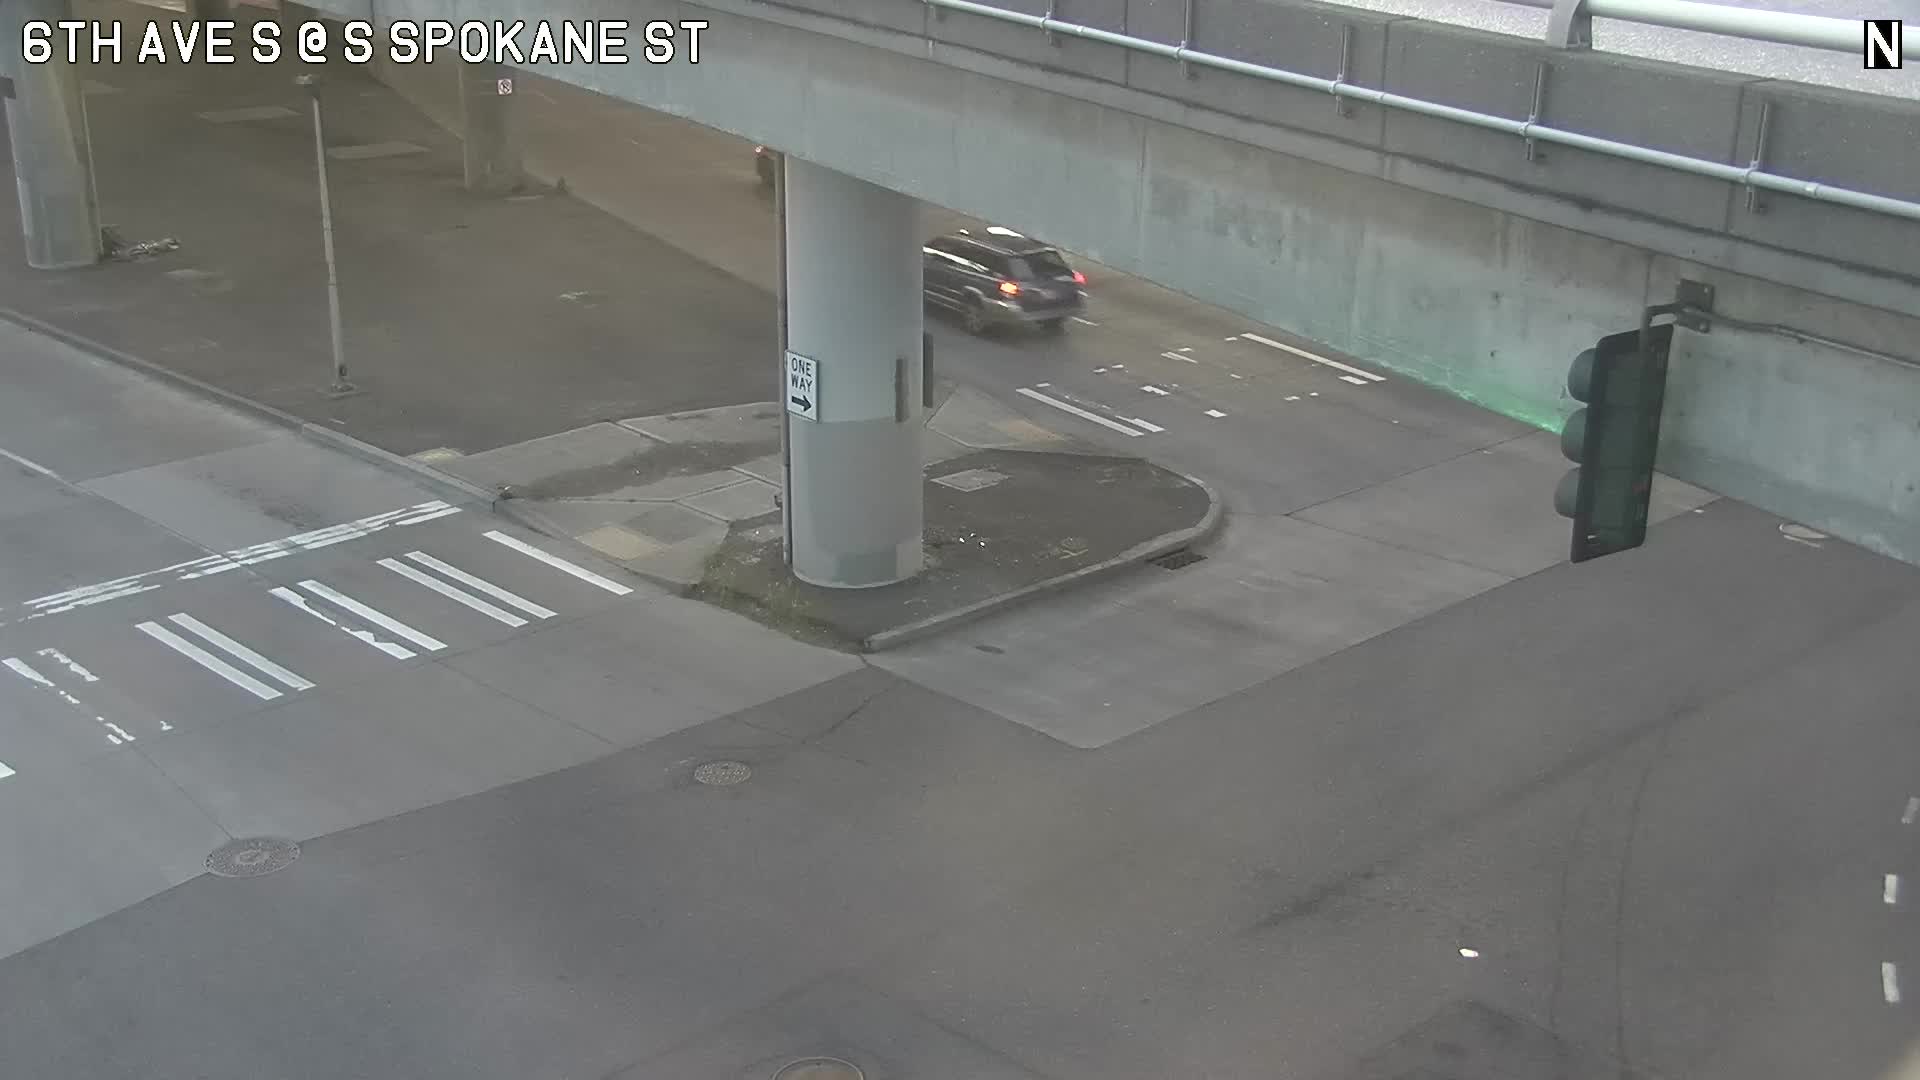 West Seattle Traffic Cameras: 6th Ave S and S Spokane St